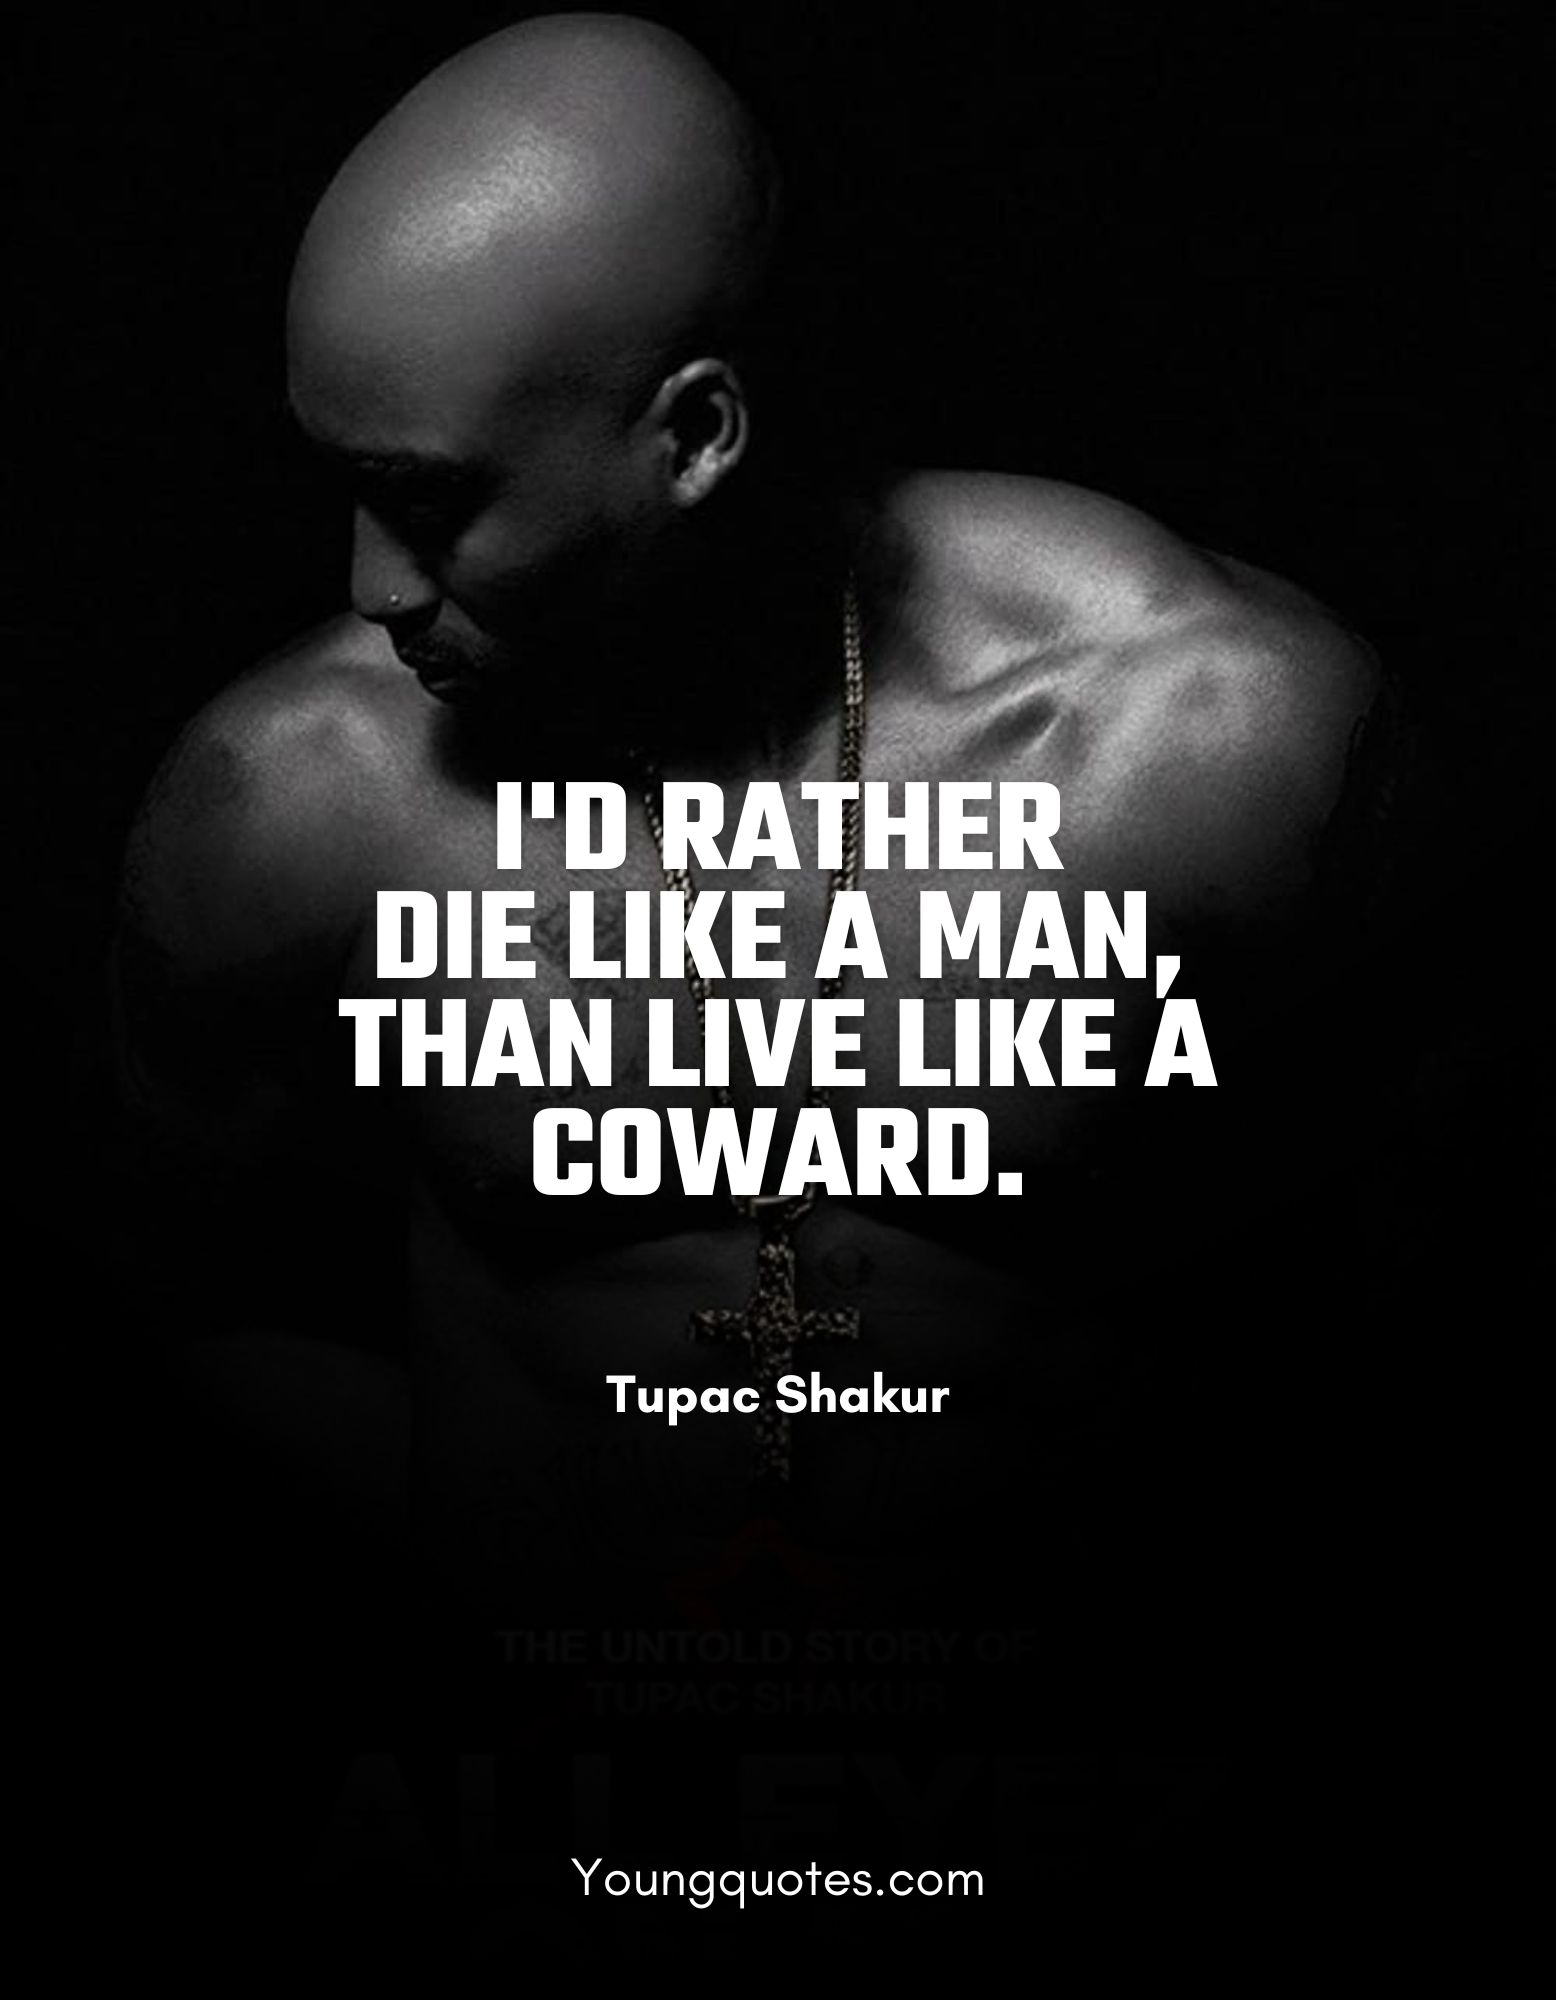 tupac shakur quotes on wisdom - I'd rather die like a man, than live like a coward.